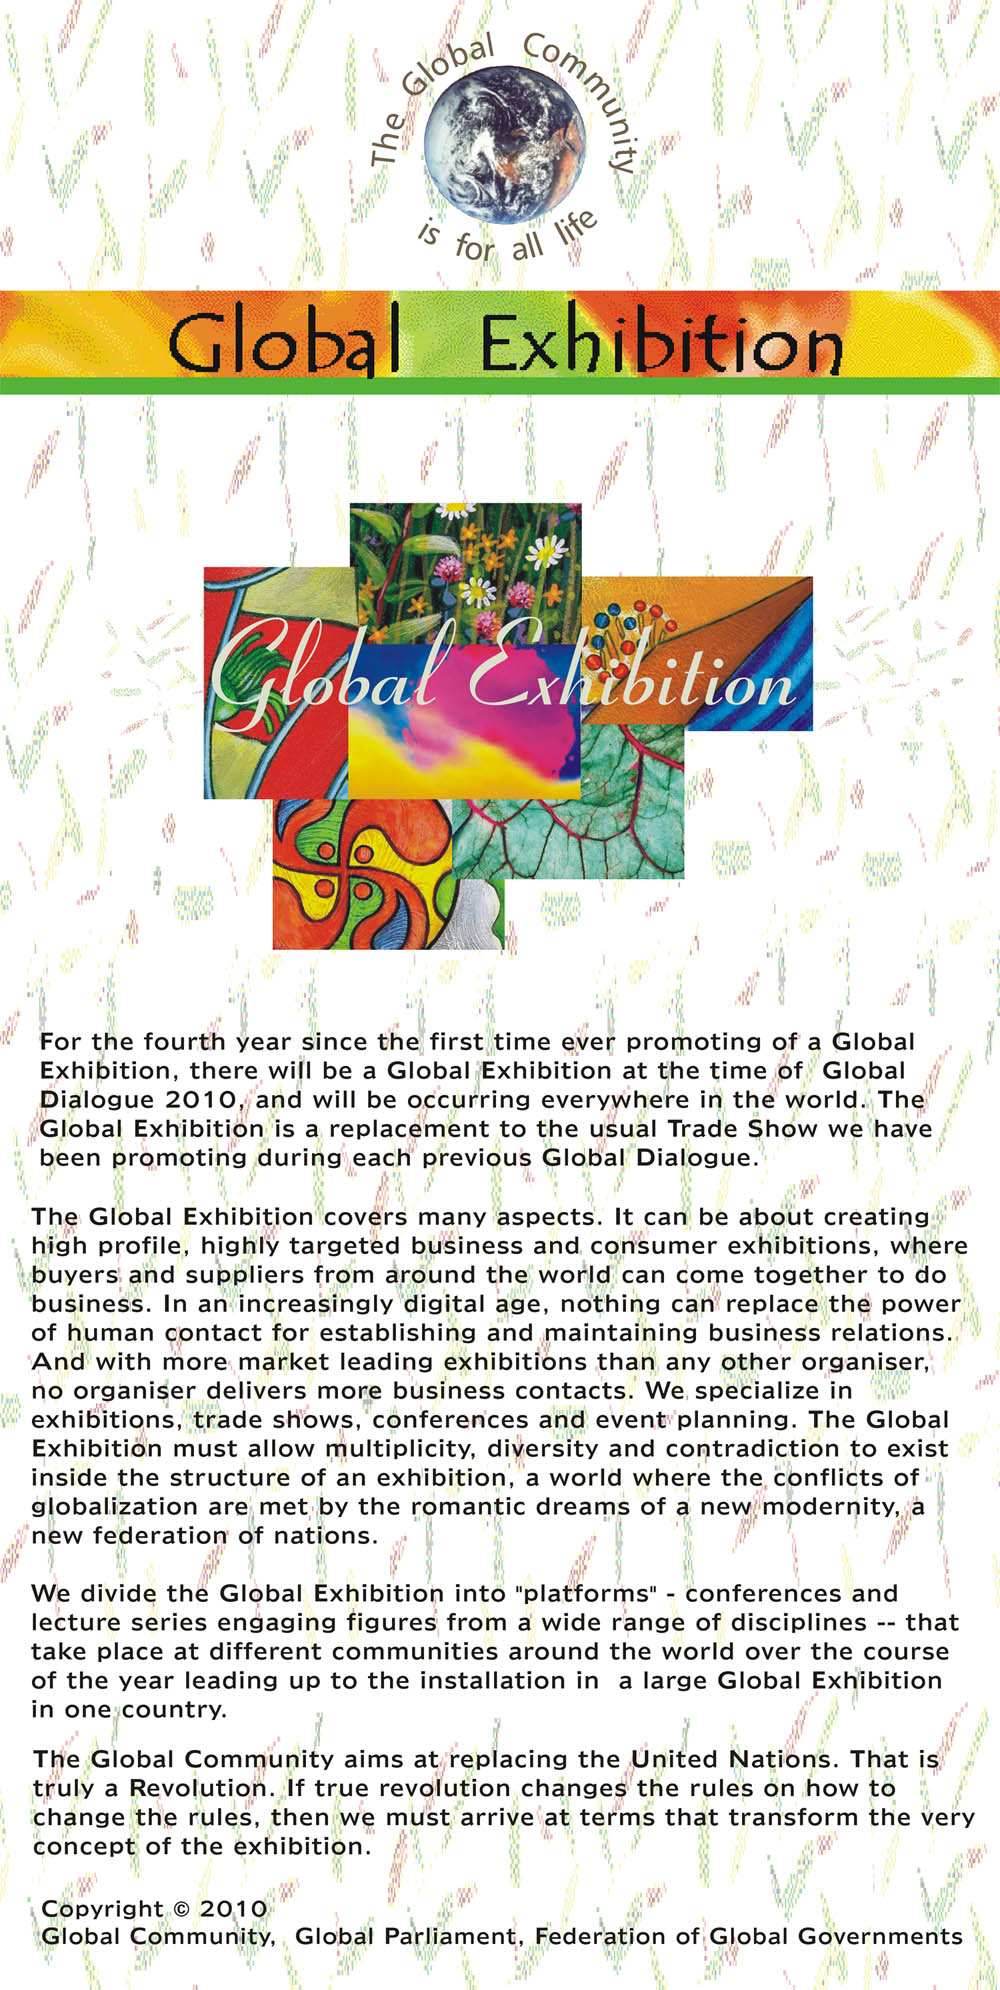  The Global Exhibition